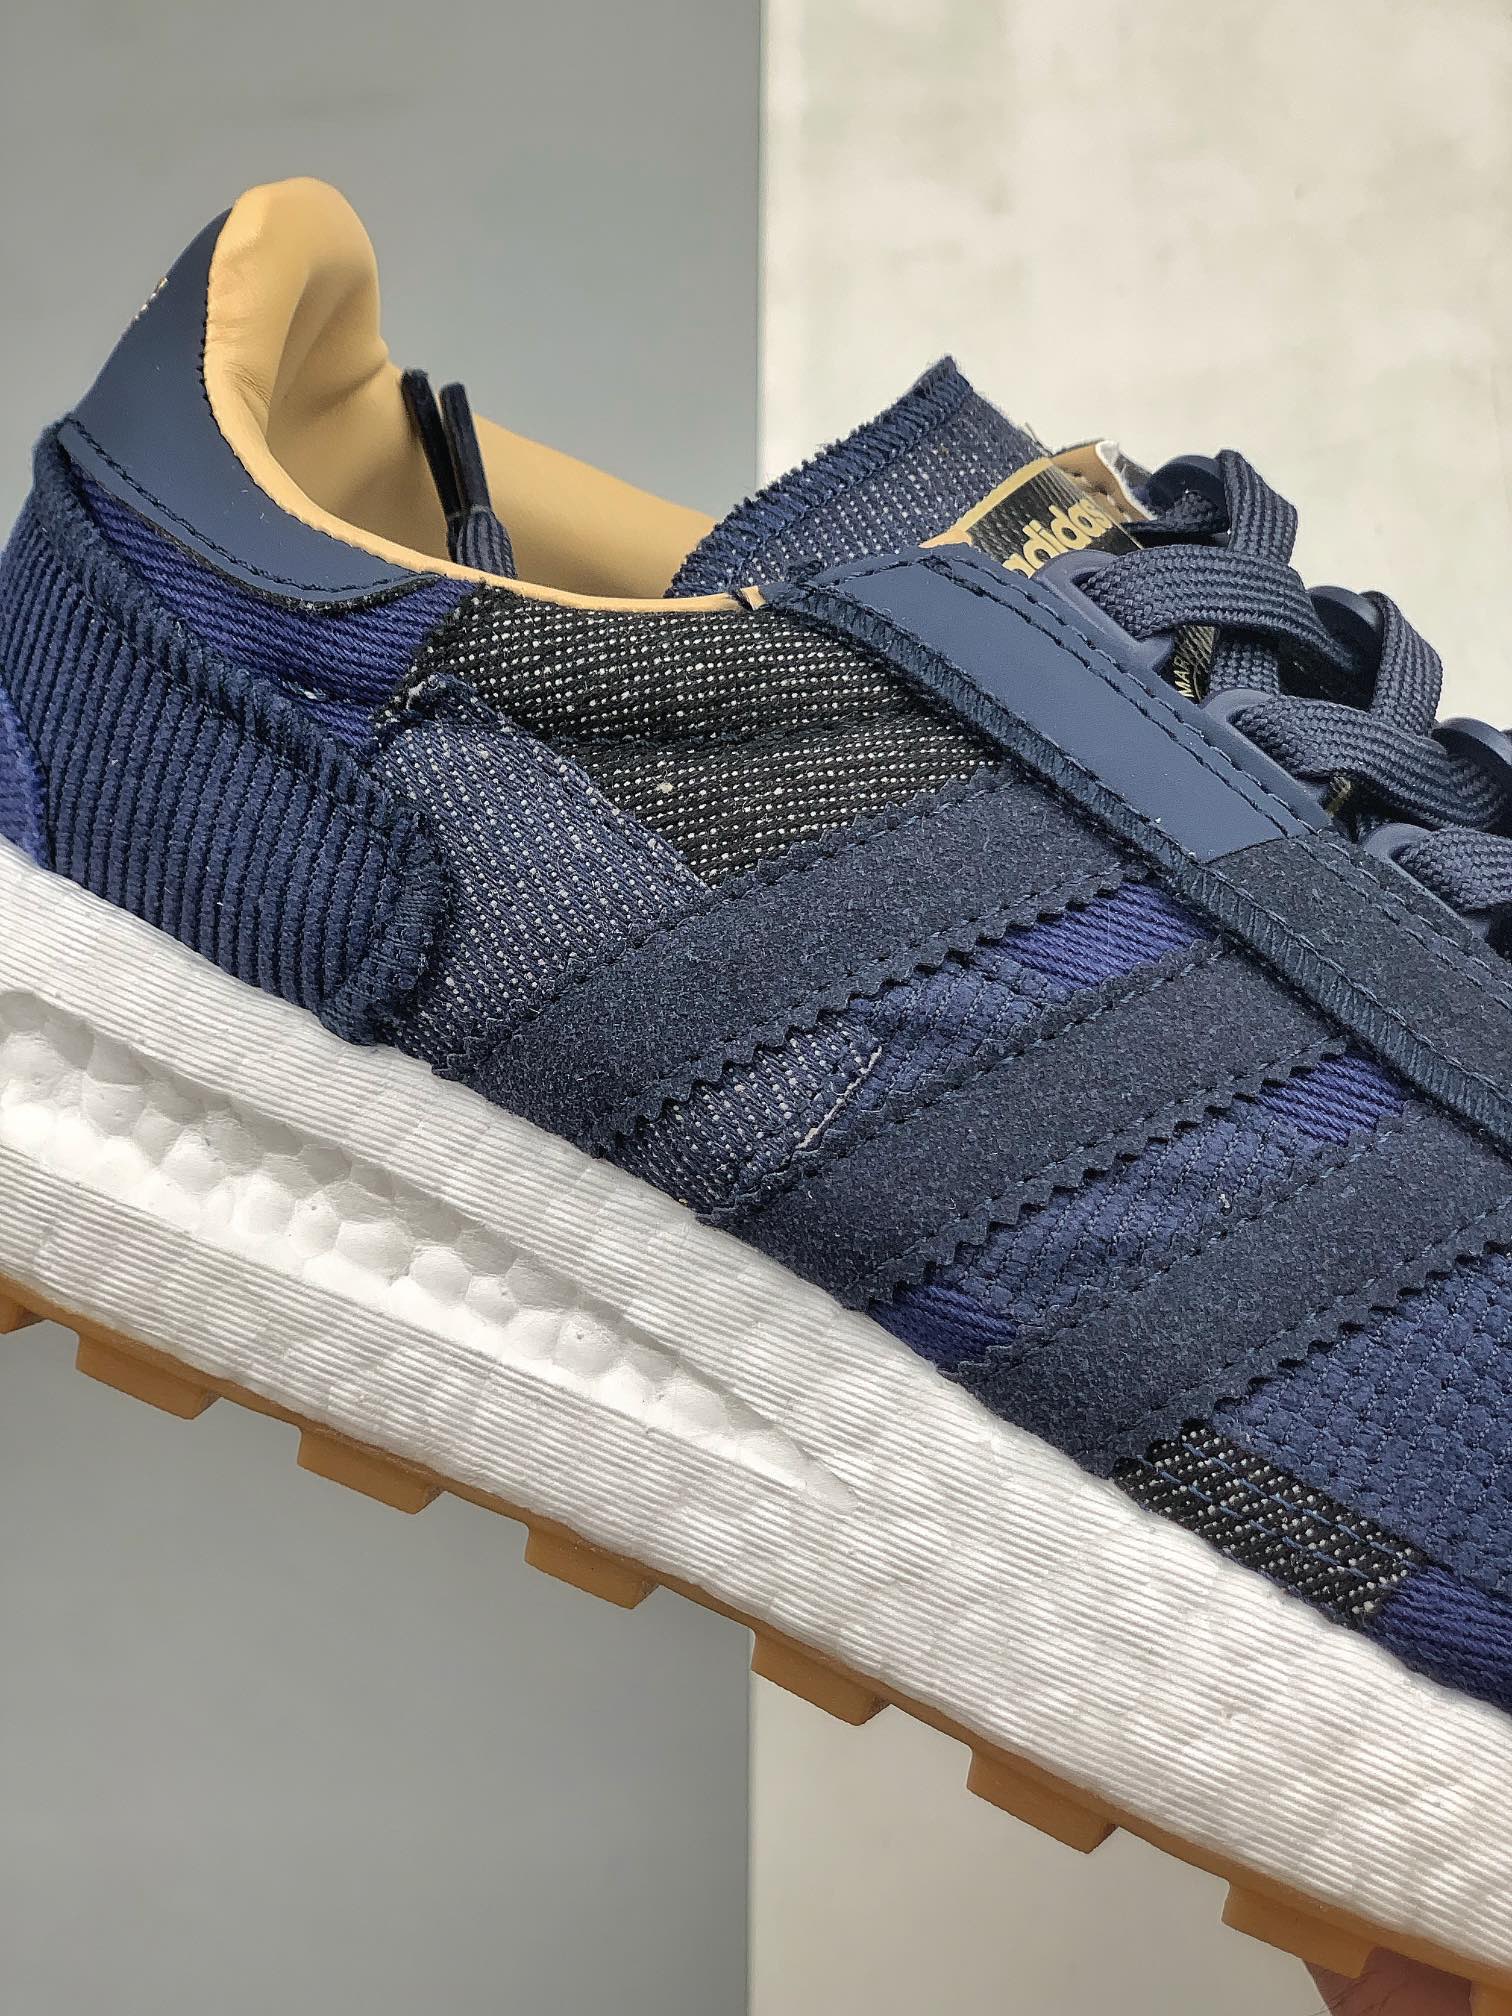 Adidas END. x Bodega x Iniki Runner BY2104 - Stylish Collaboration for Sneaker Lovers